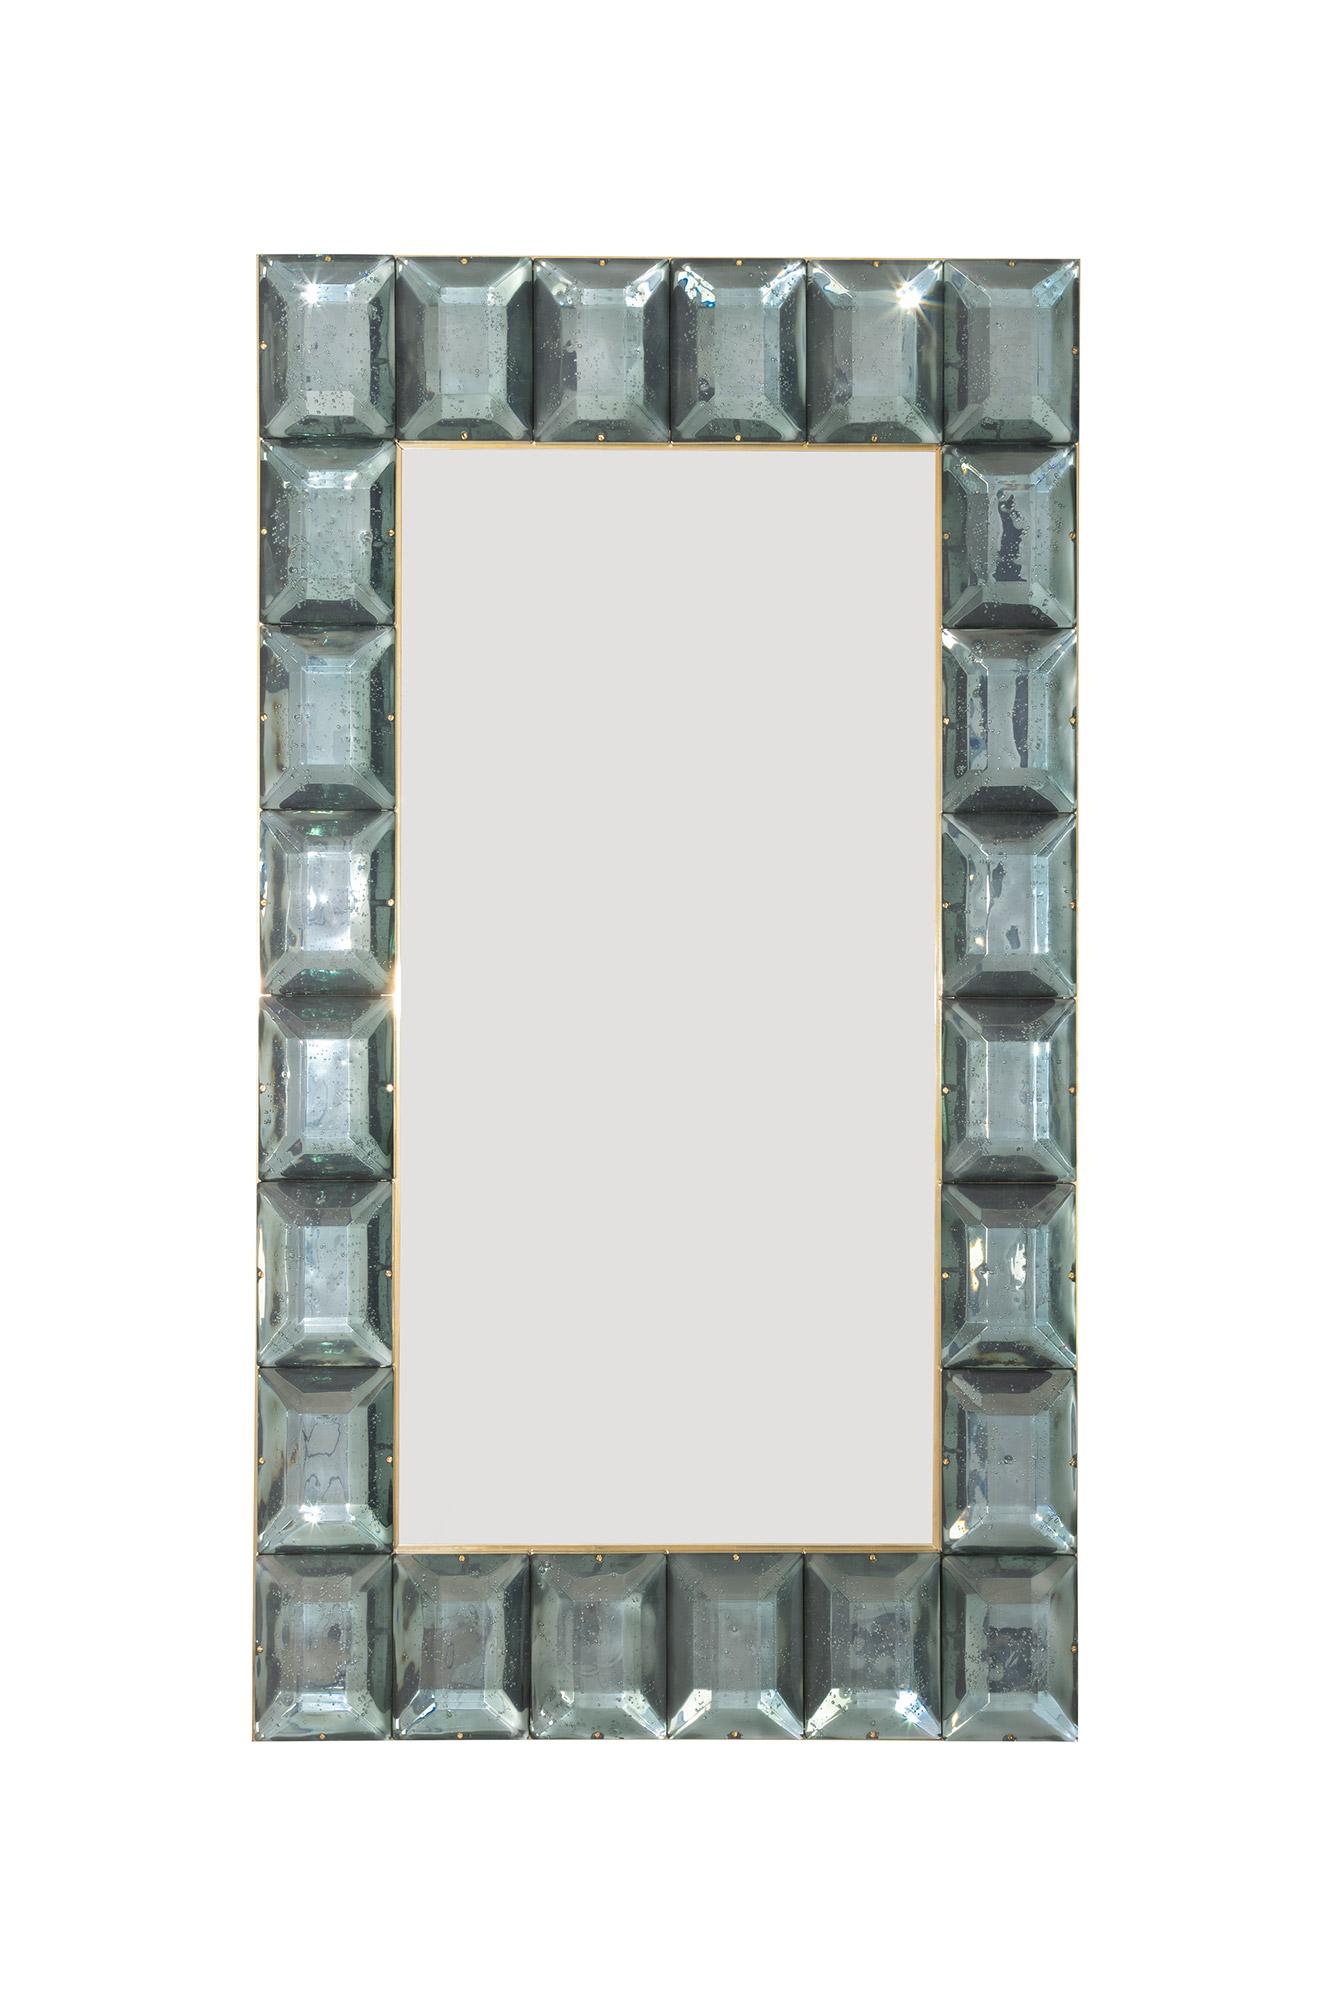 Large sea green aqua diamond cut Murano glass mirrors, in stock.
Contemporary and customizable mirror with a faceted sea green acqua Murano glass frame, edged in brass and luxury handcrafted by a team of artisans in Venice, Italy. Each pink glass